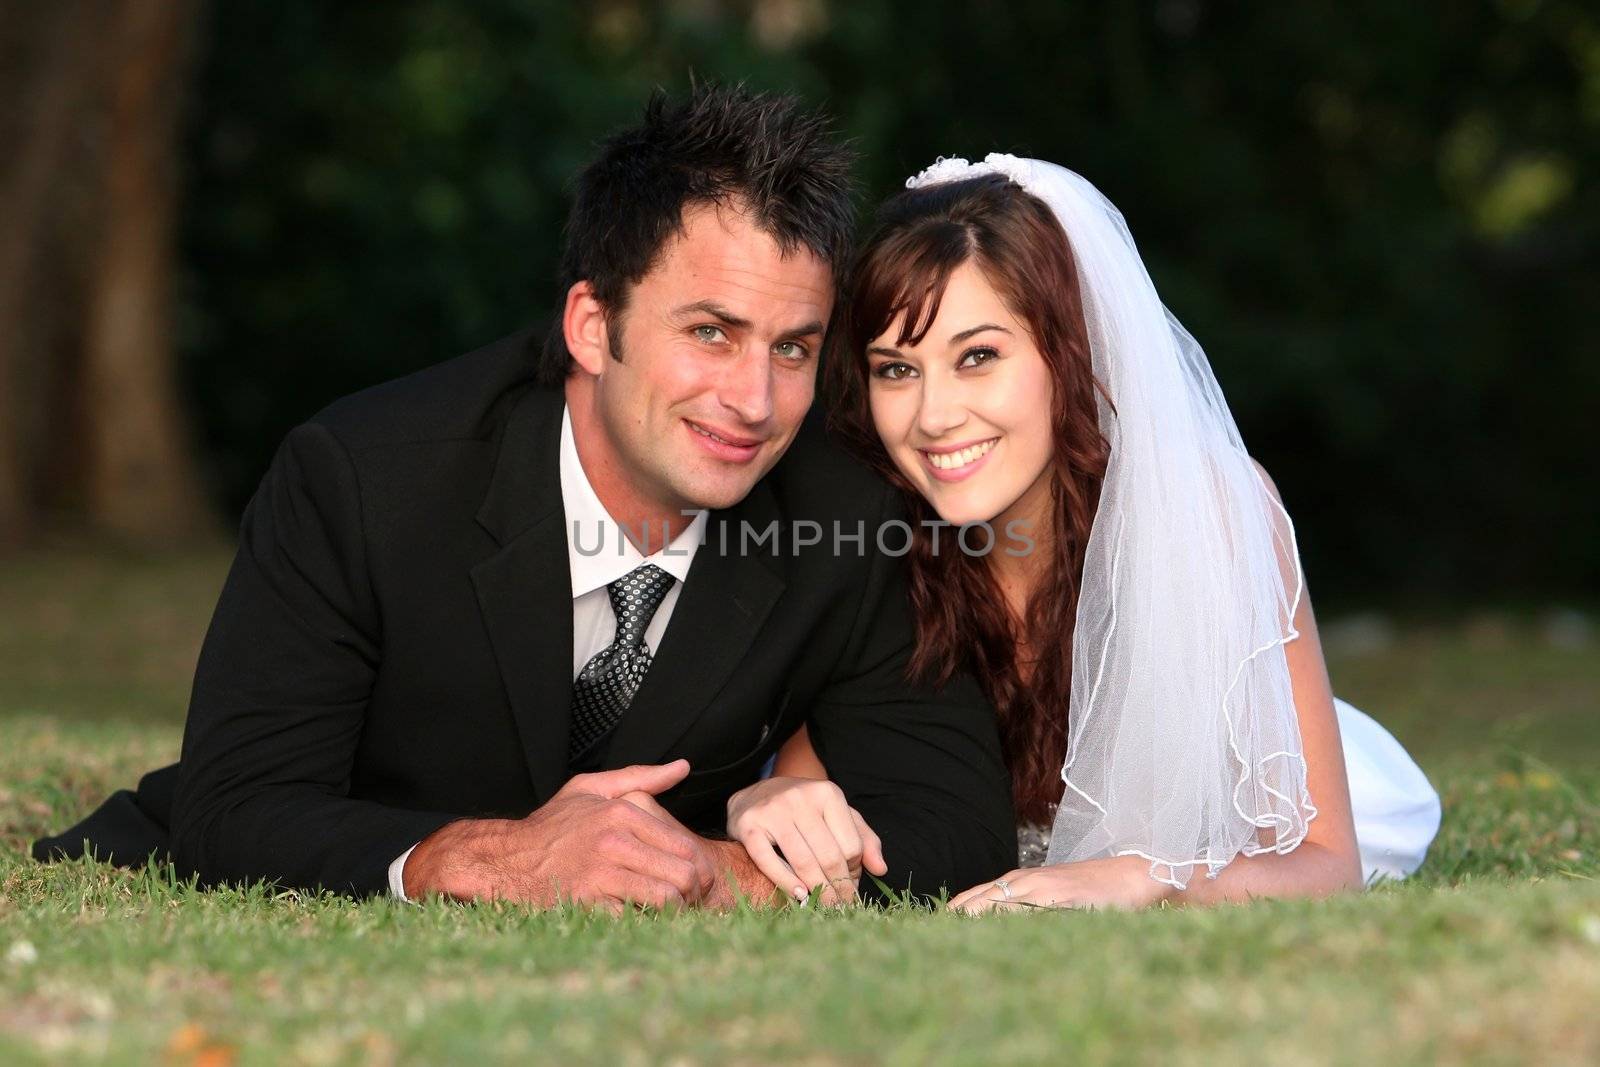 Beautiful wedding couple laying down outdoors on the grass